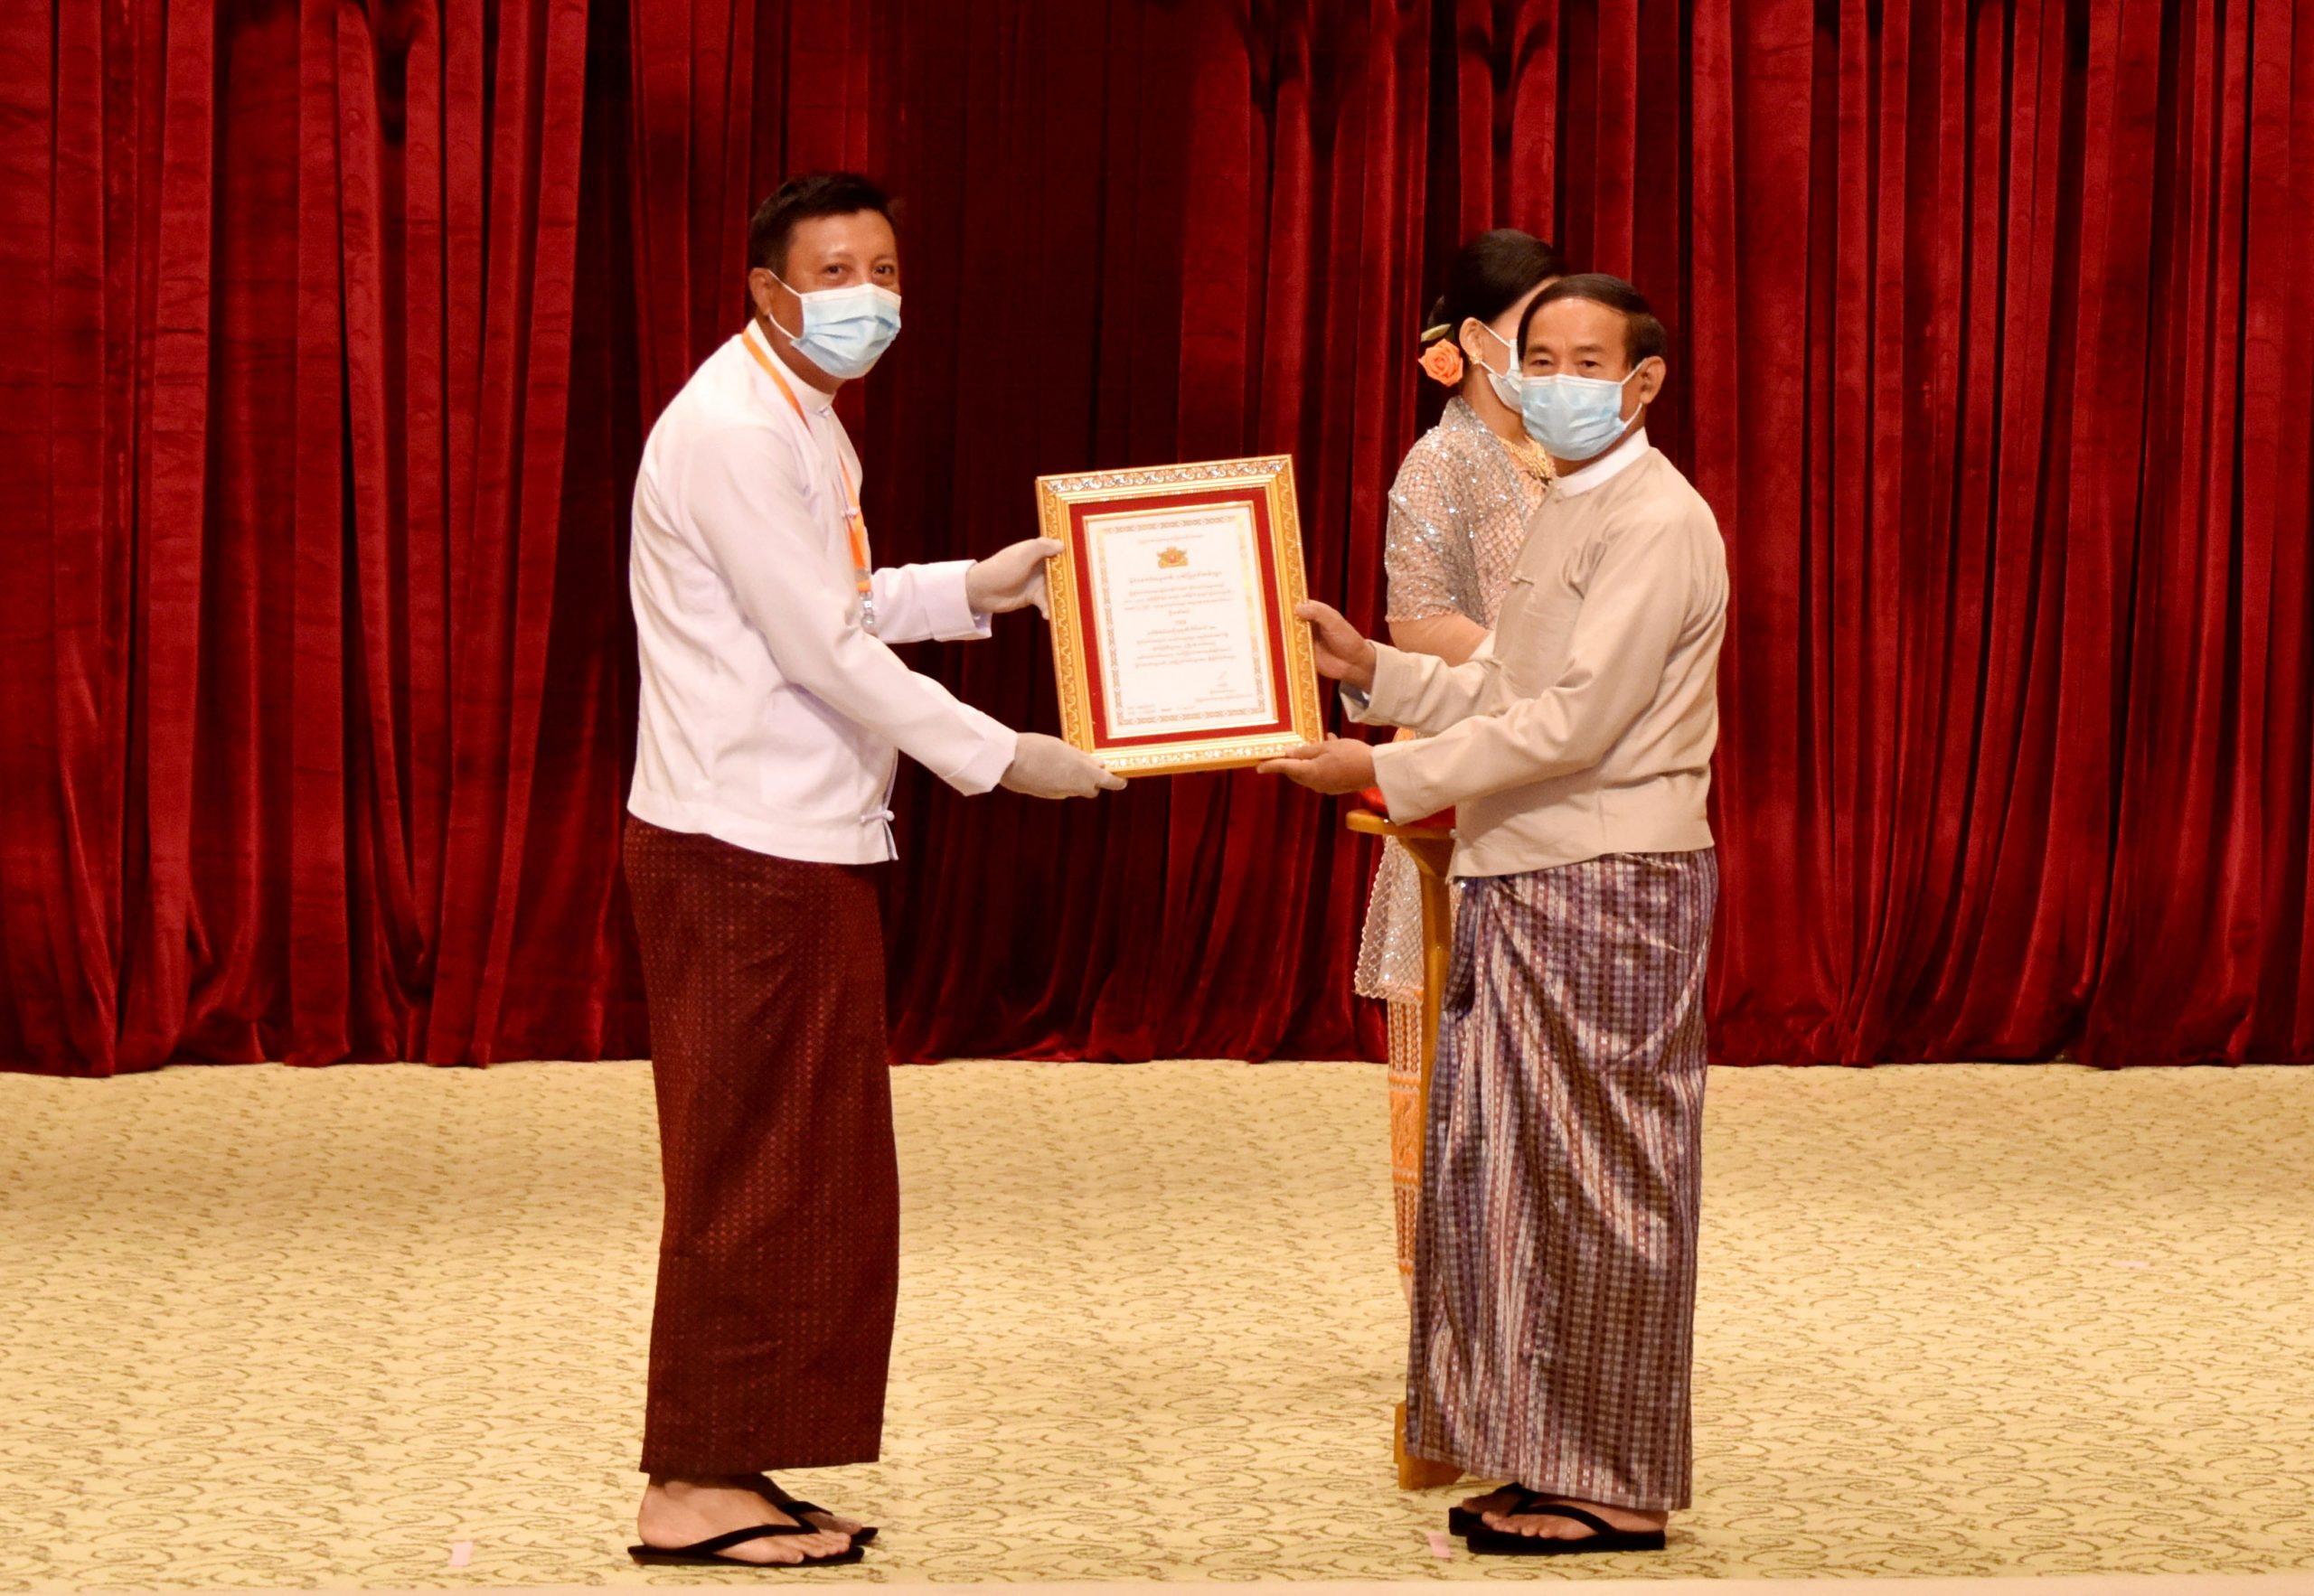 Max Energy was honored by President as one of Myanmar’s ‘biggest taxpayers’ for 2018-2019 tax year